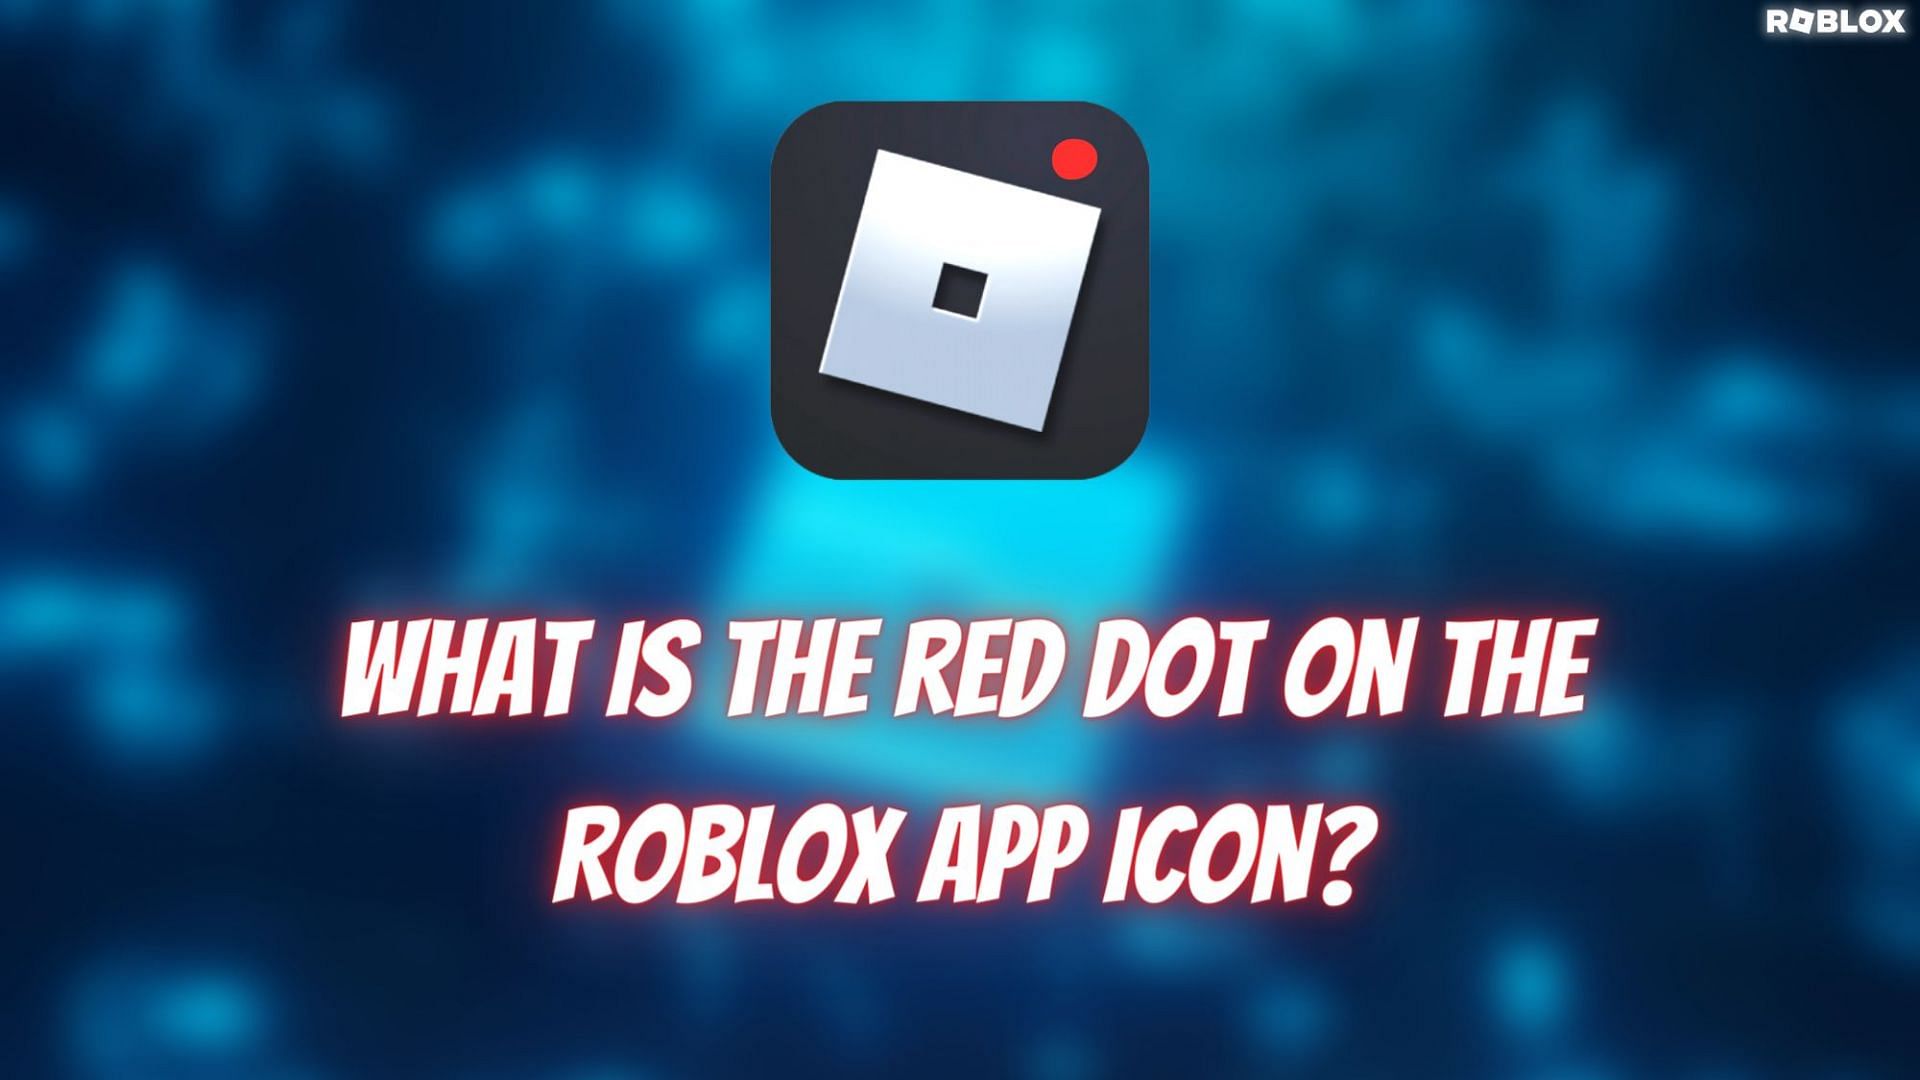 What is the red dot on the Roblox app icon?